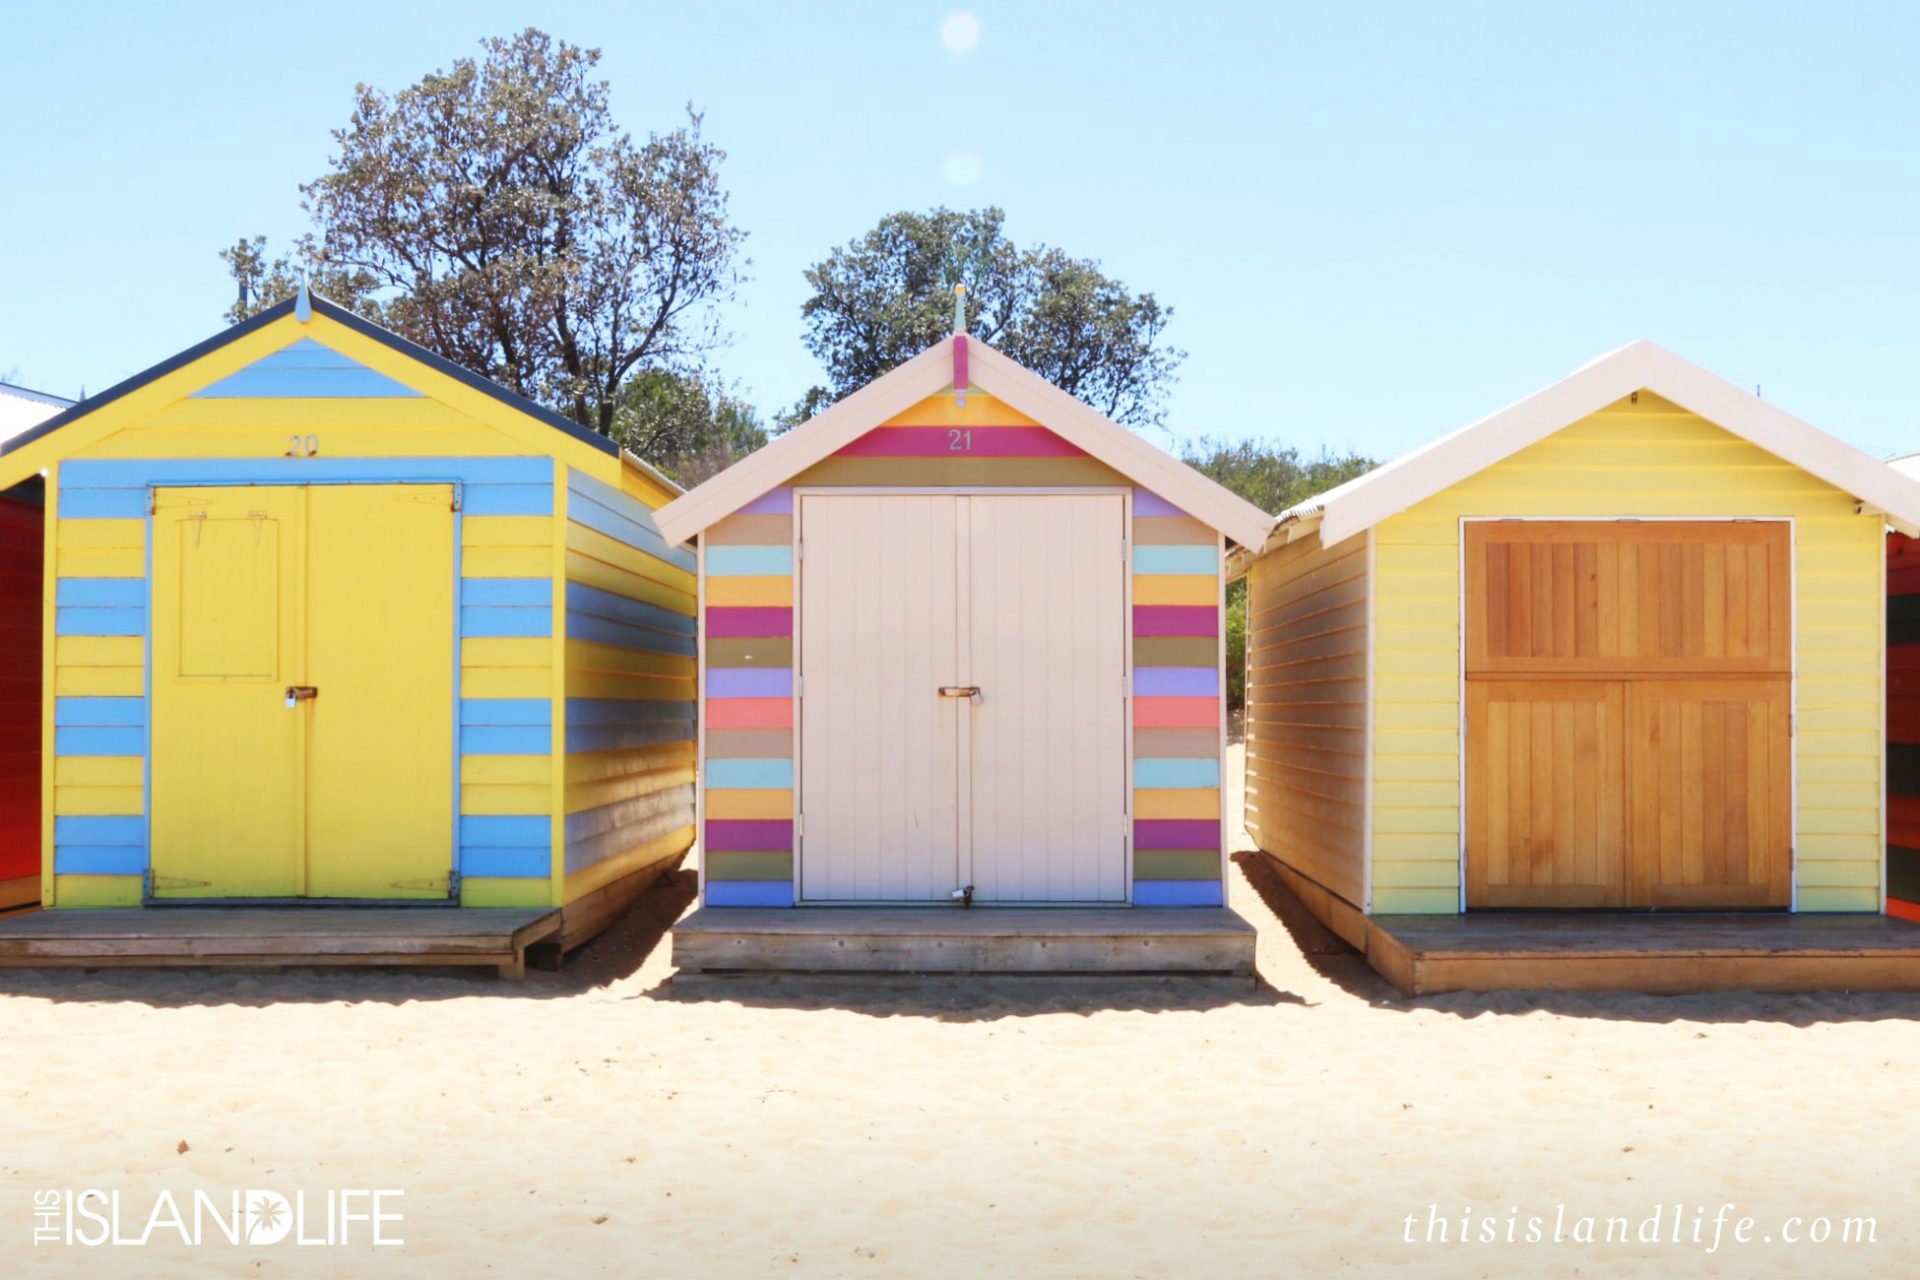 THIS ISLAND LIFE | Bathing Boxes at Brighton Beach in Melbourne